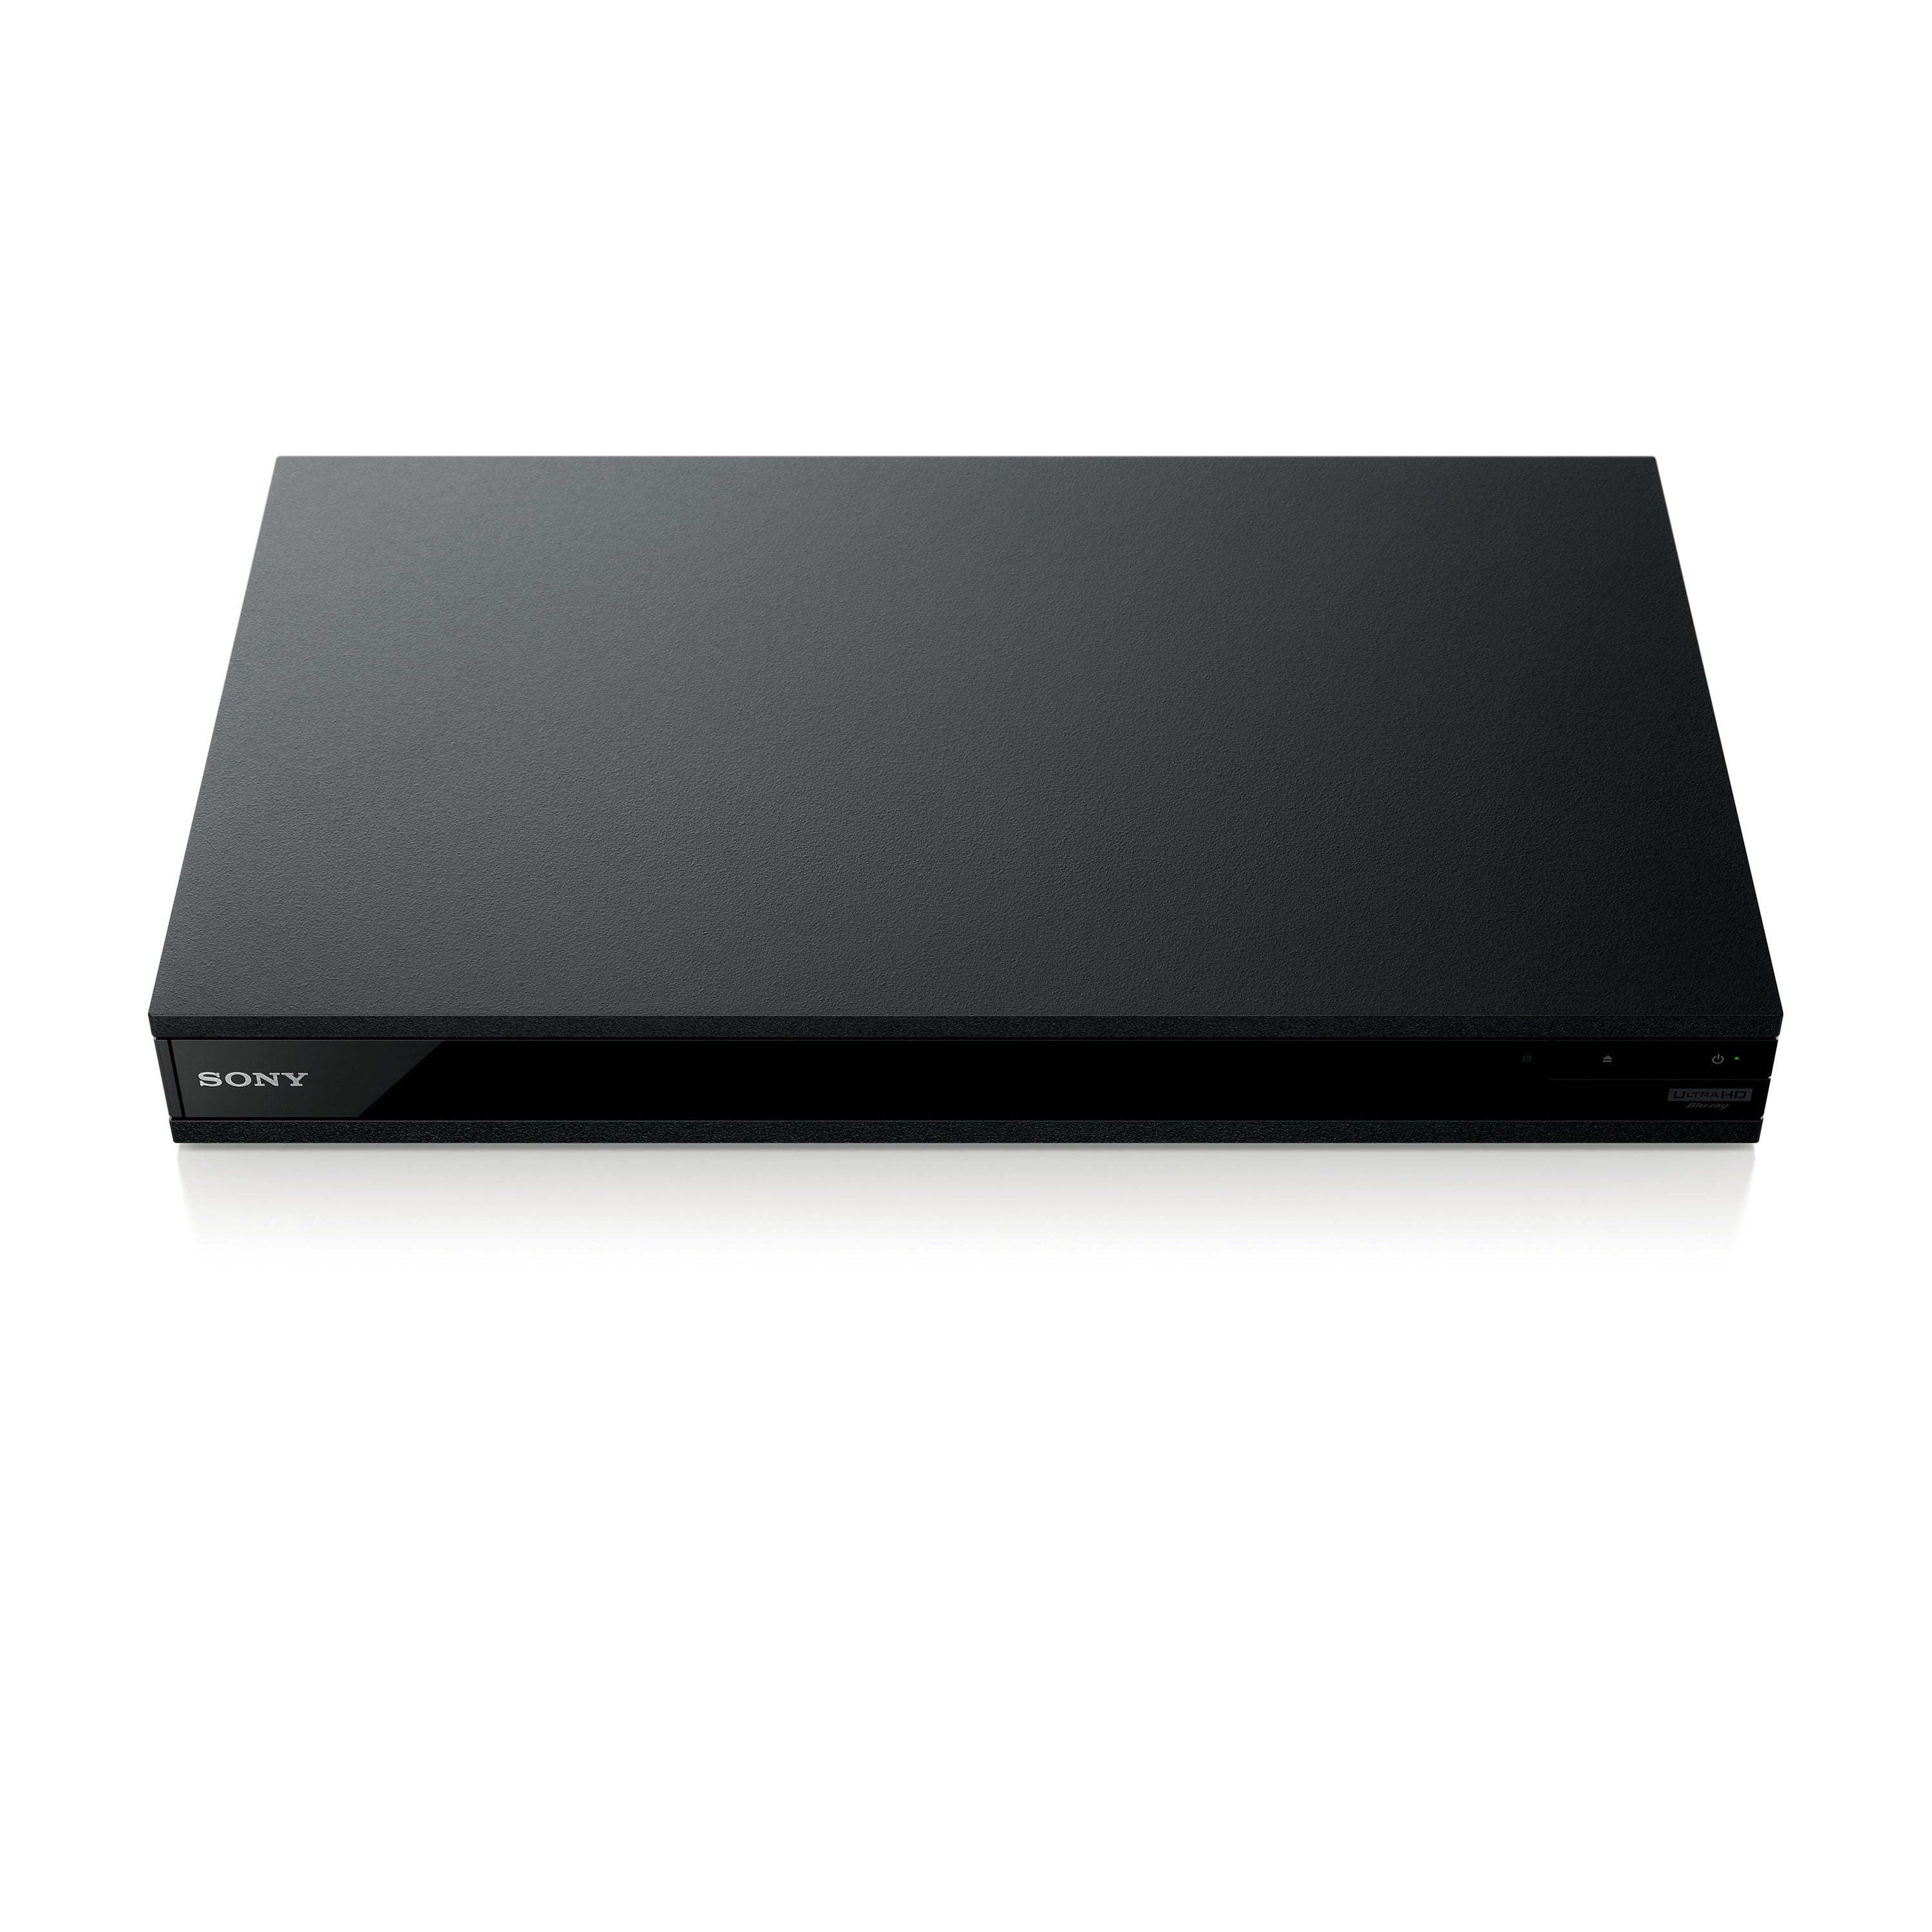 4K Ultra HD Blu-ray™ Player with Dolby Atmos®, HDR and Wi-Fi for Streaming Video | UBP-X800M2